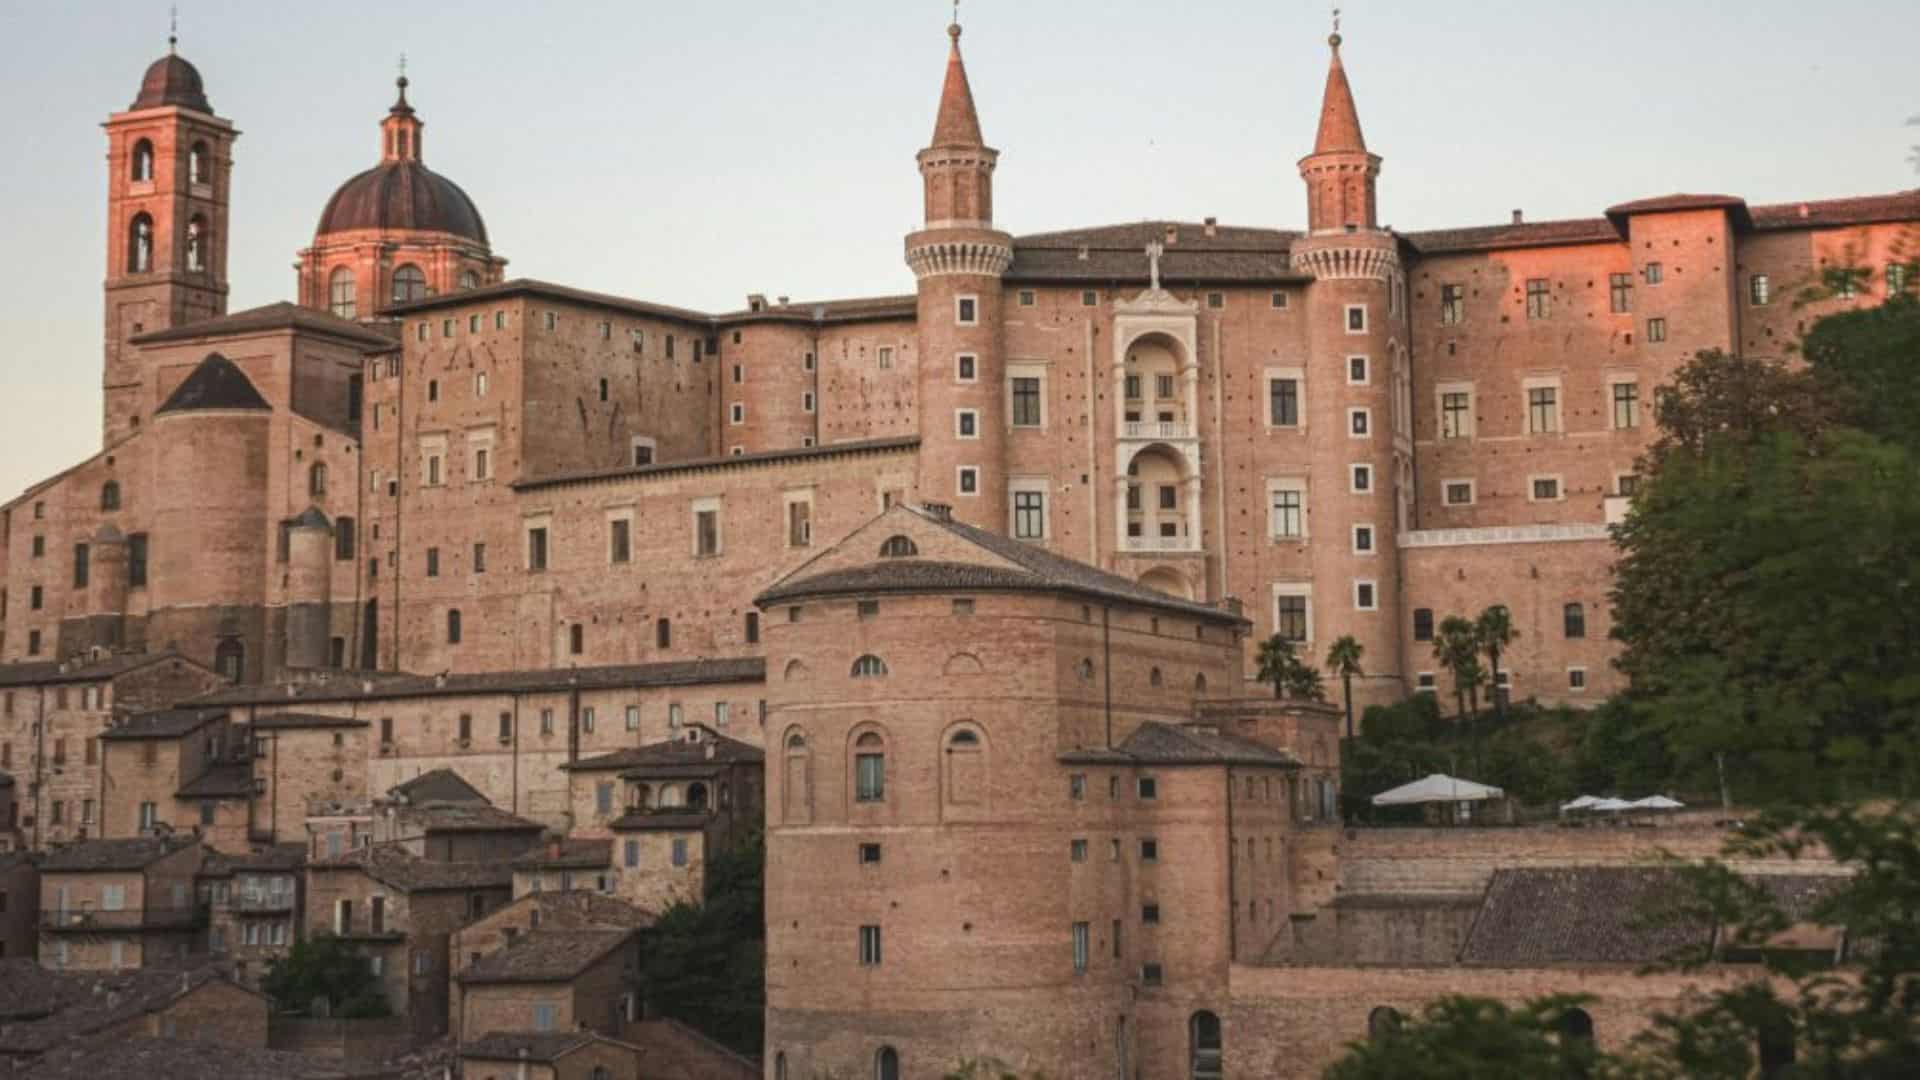 The Ducal Palace of Urbino